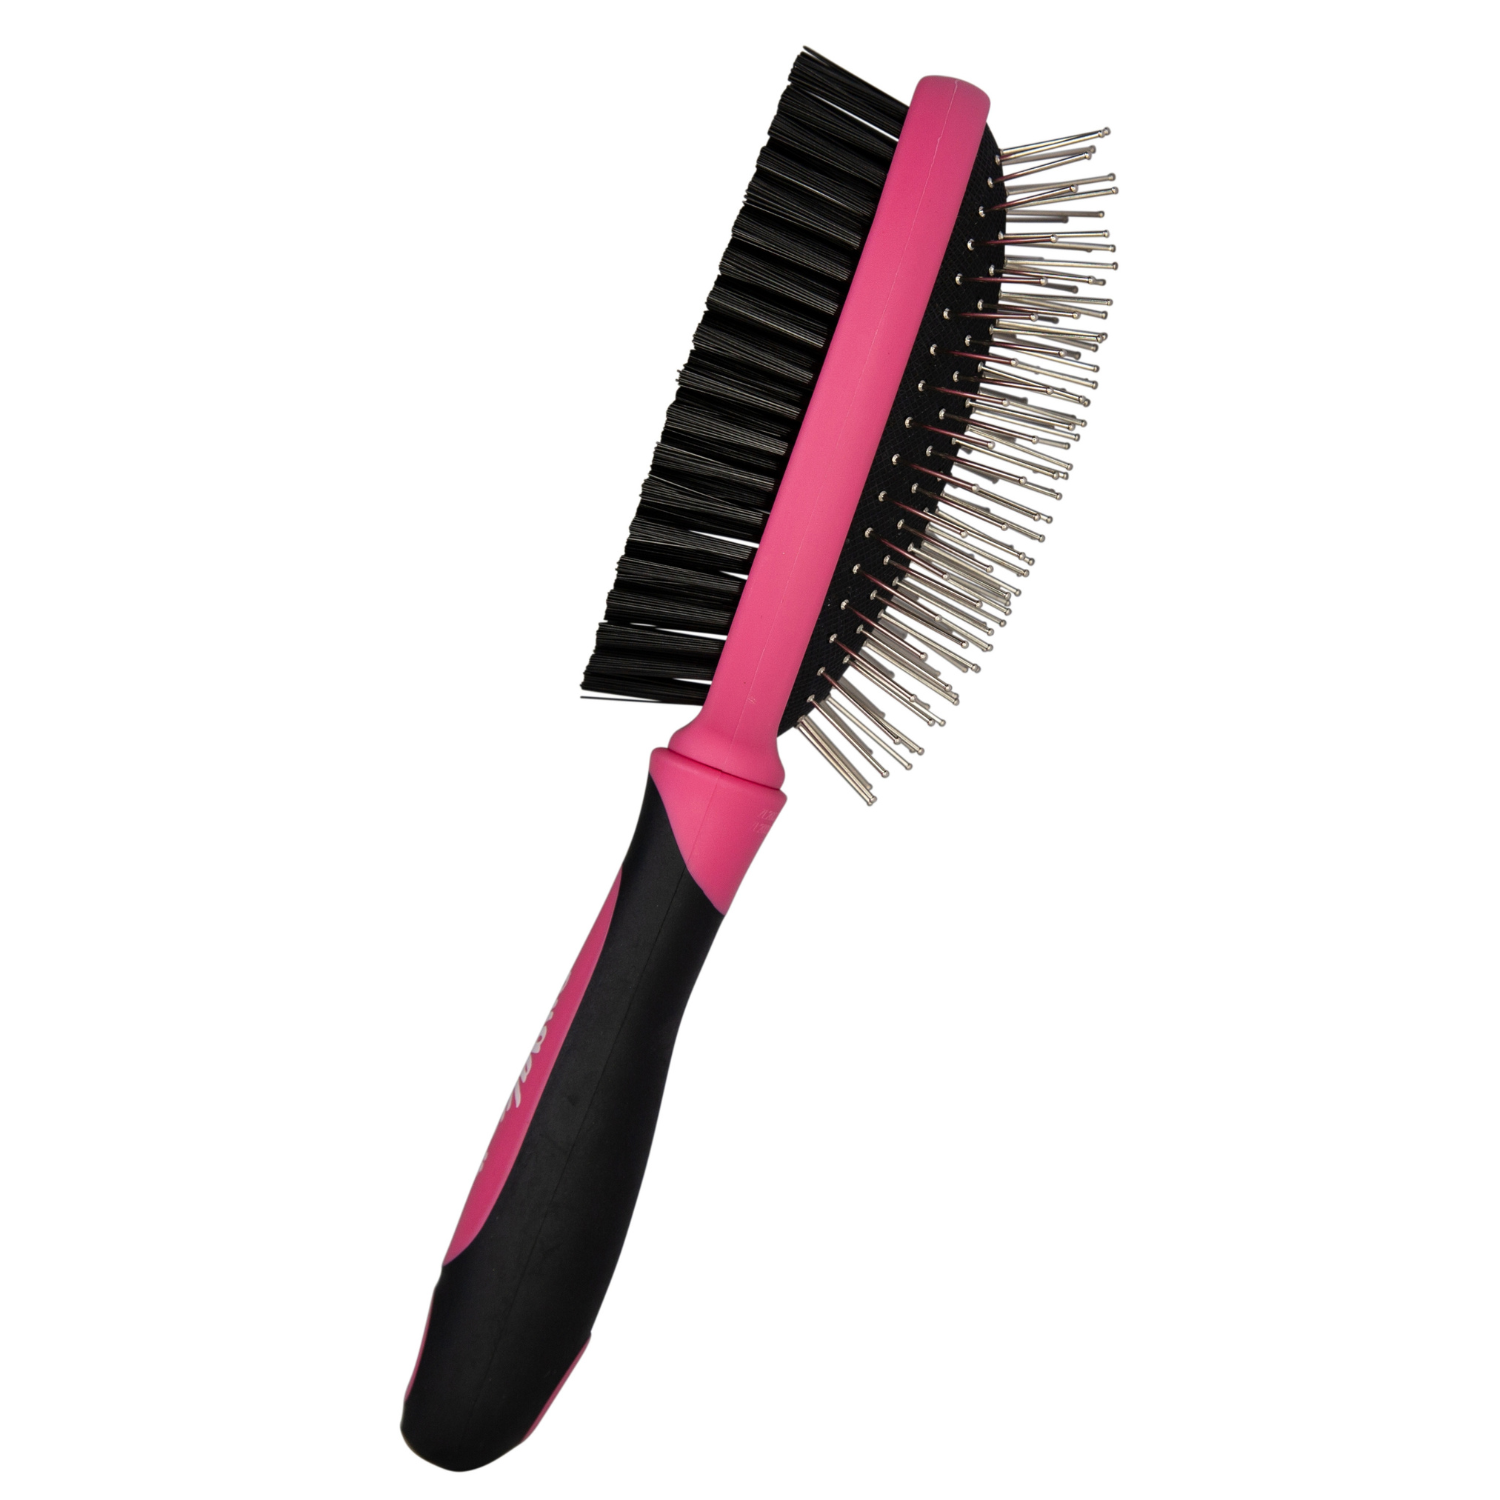 Bugalugs 2-in-1 Double-sided Pet Grooming Brush in Pink and Black